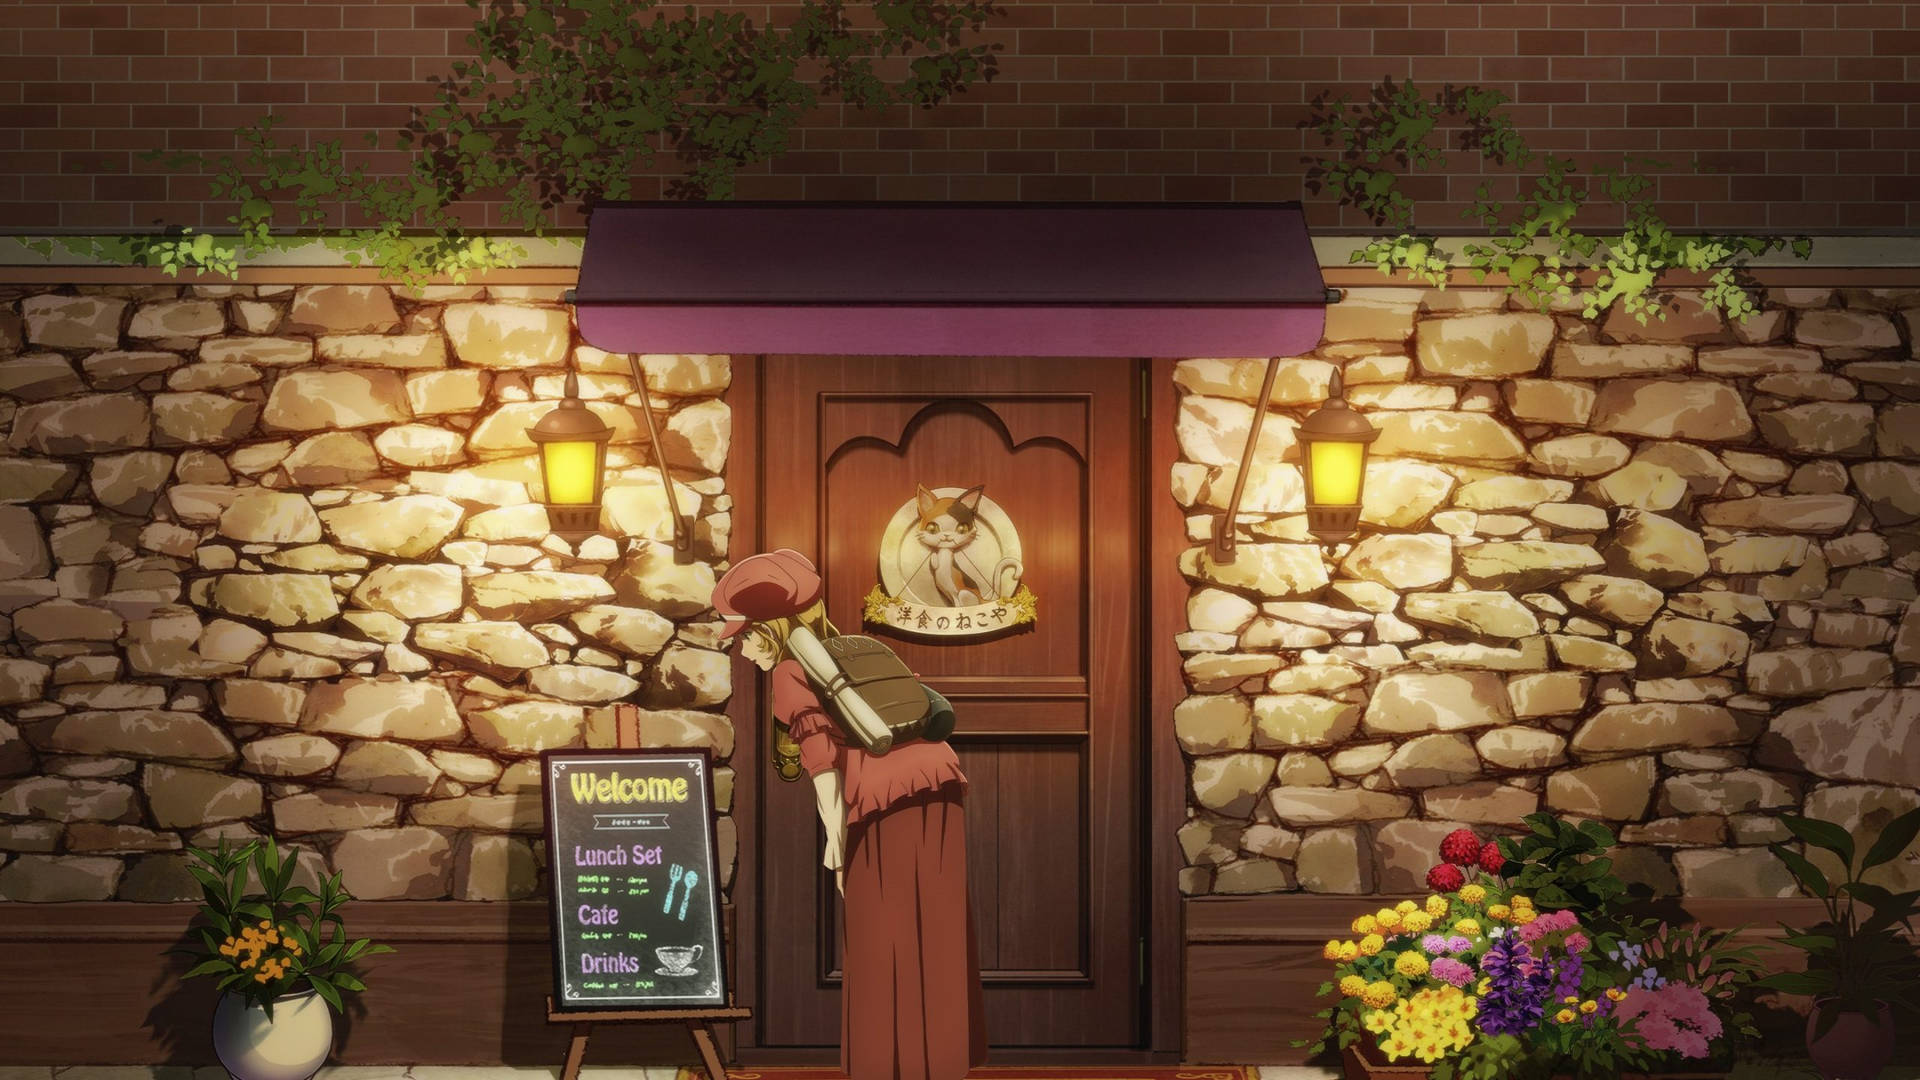 Restaurant To Another World Door Entrance Background